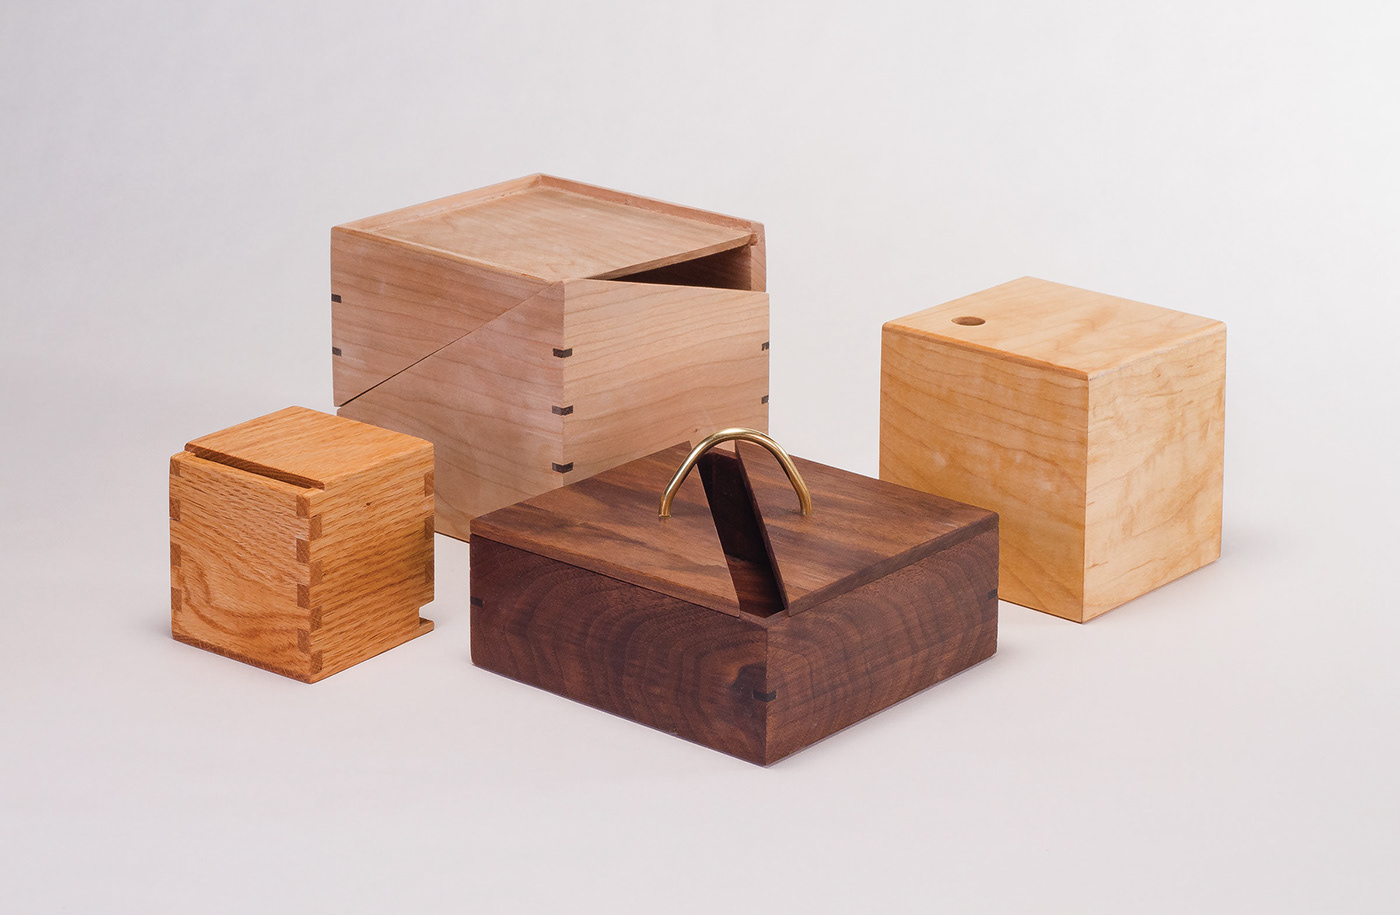 objects box solid wood Cassic Ho Design concept furniture